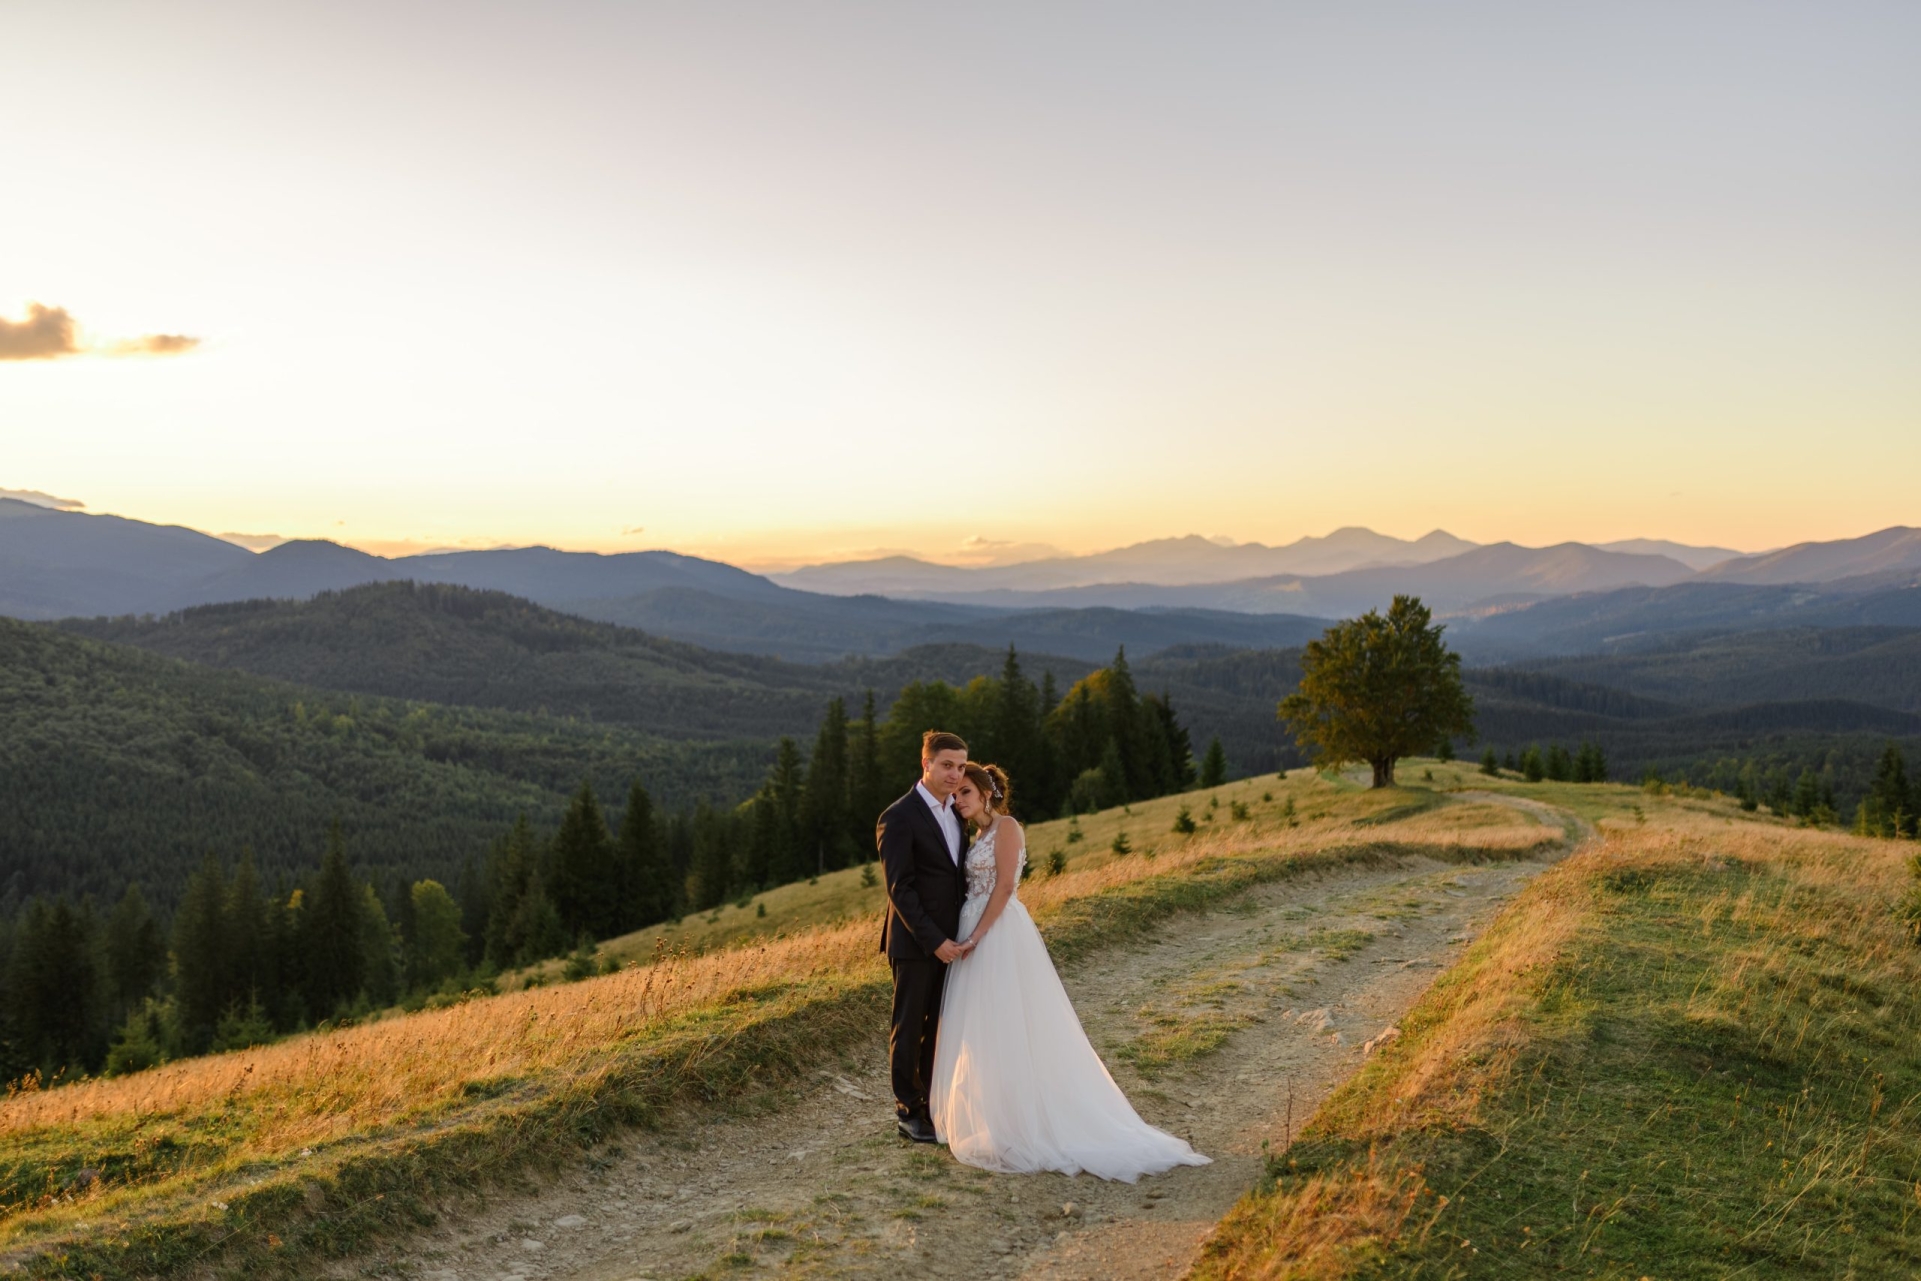 wedding photography in the mountains 2021 09 02 01 28 54 utc min scaled